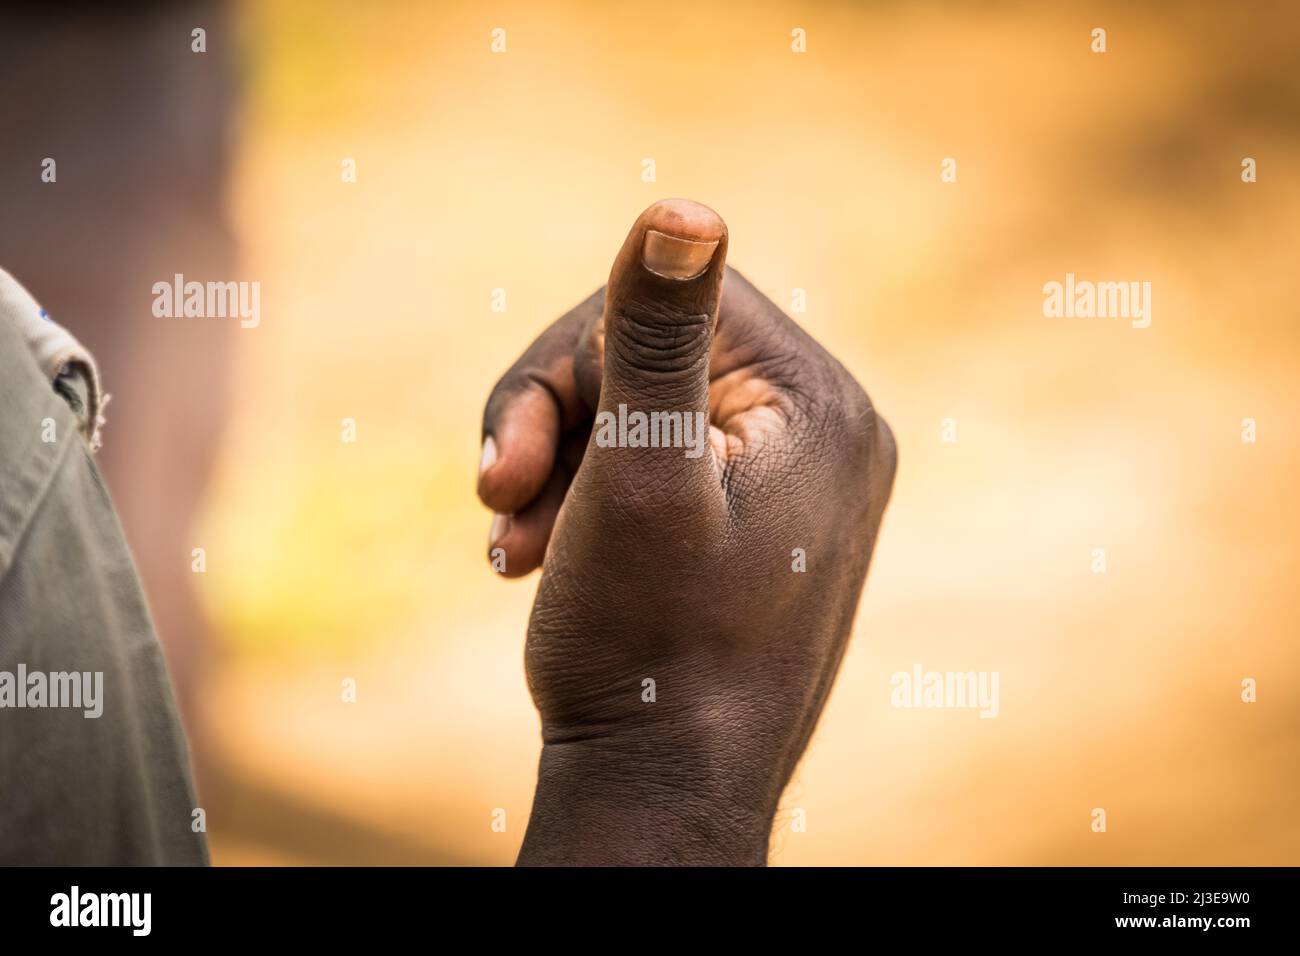 Sign of approval. All is well. Thumbs up. Dark-skinned person. Horizontal. Color. Stock Photo